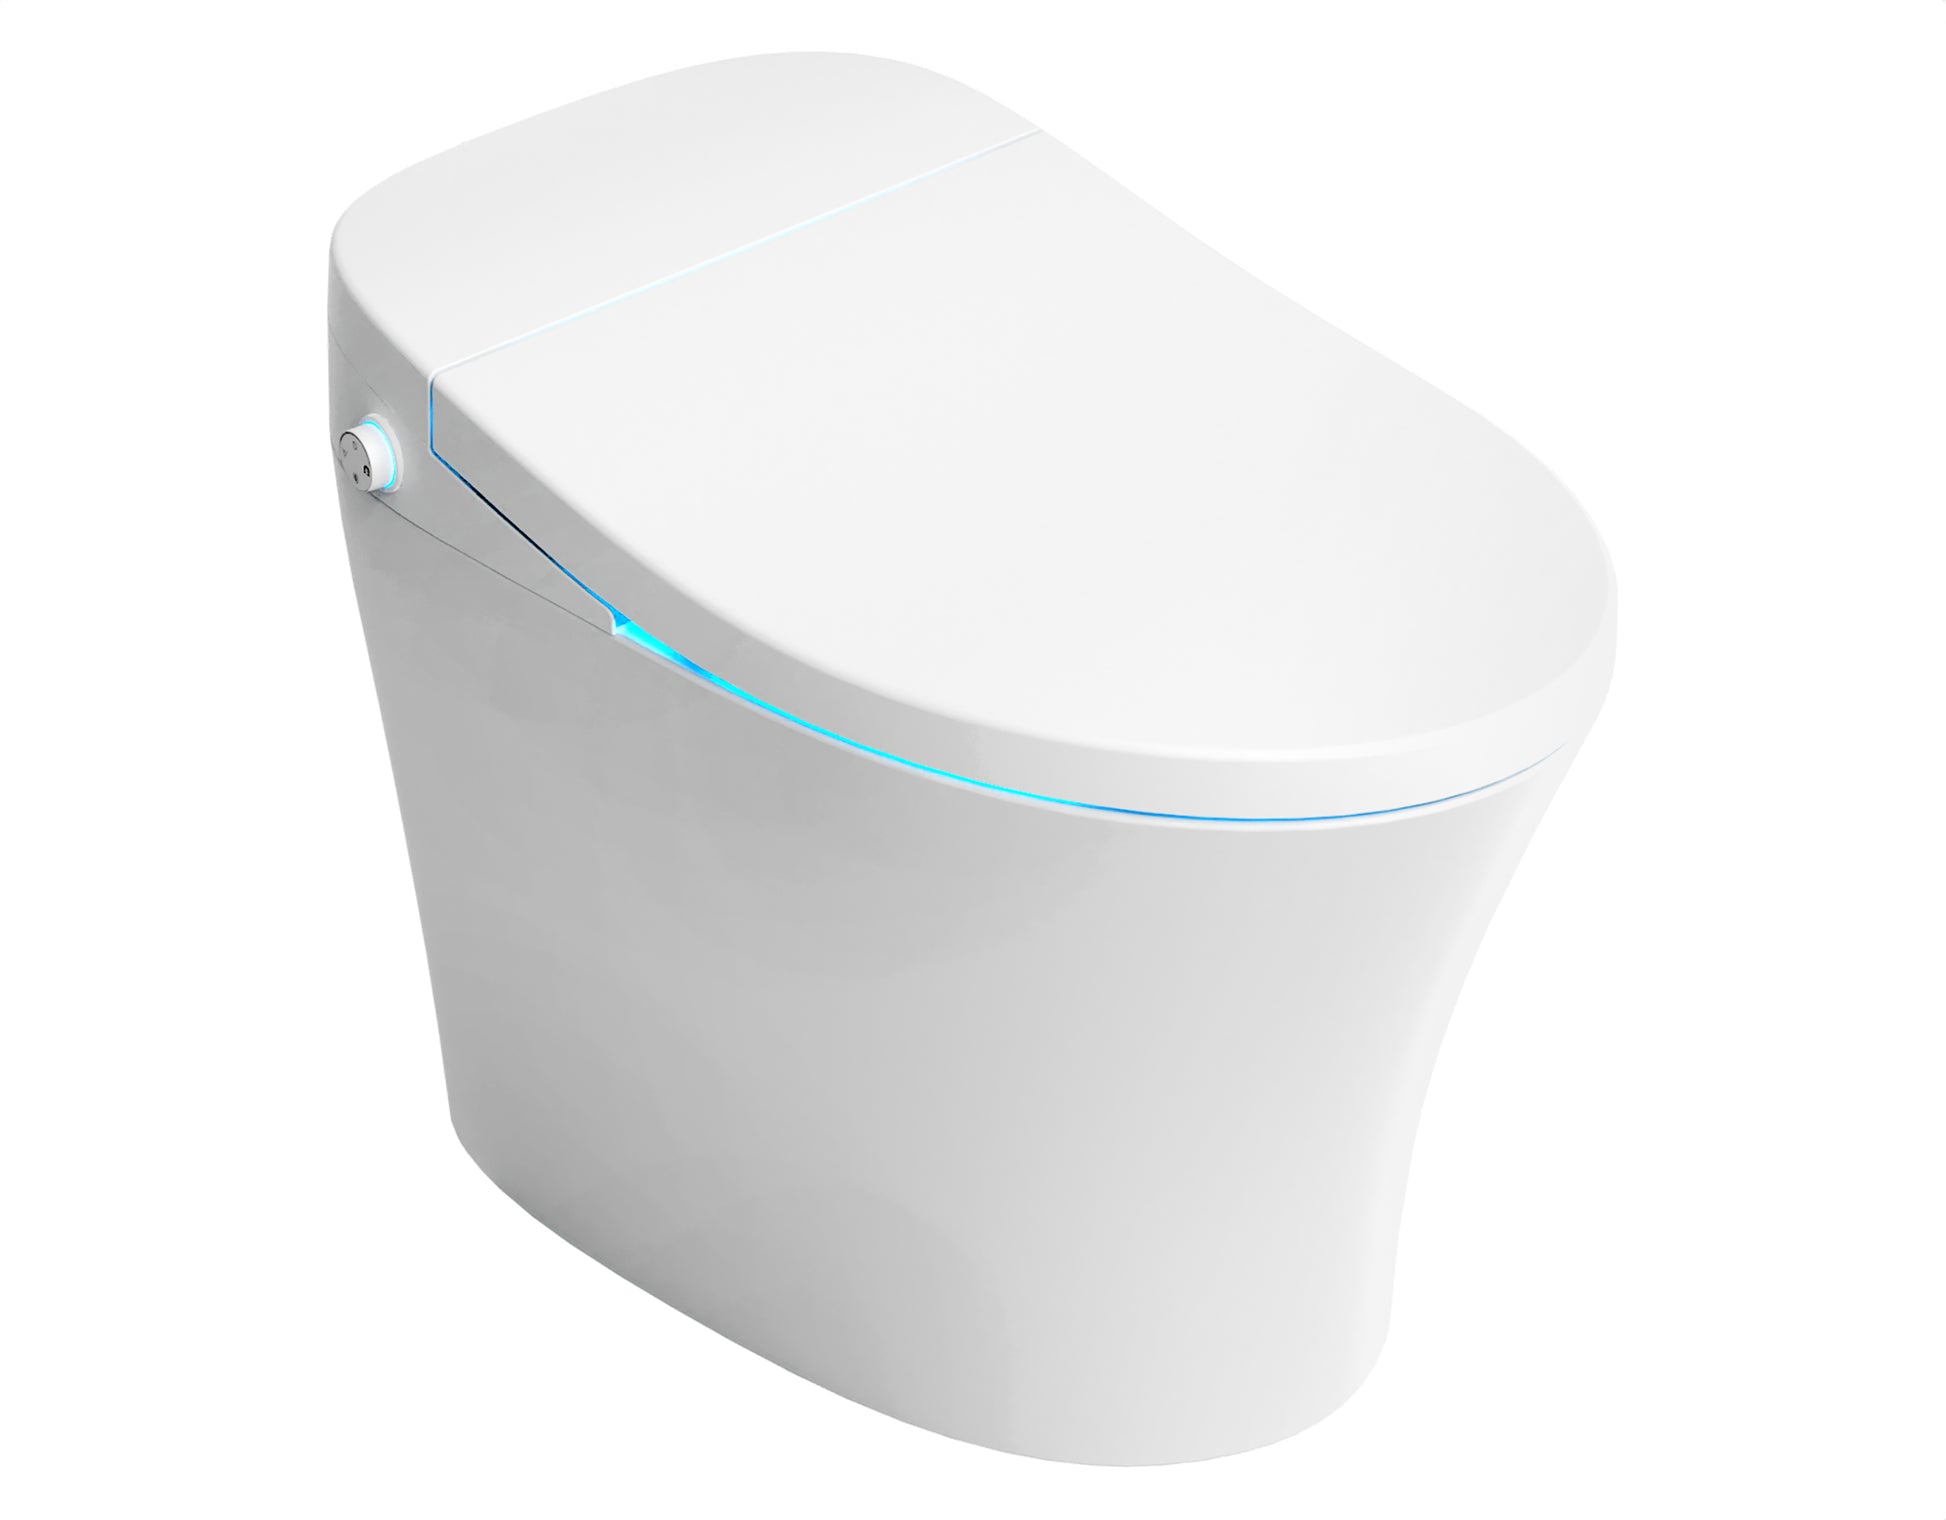 TL-ST823WH - ENVO Vail Smart Toilet Bidet with Remote and Auto Flush